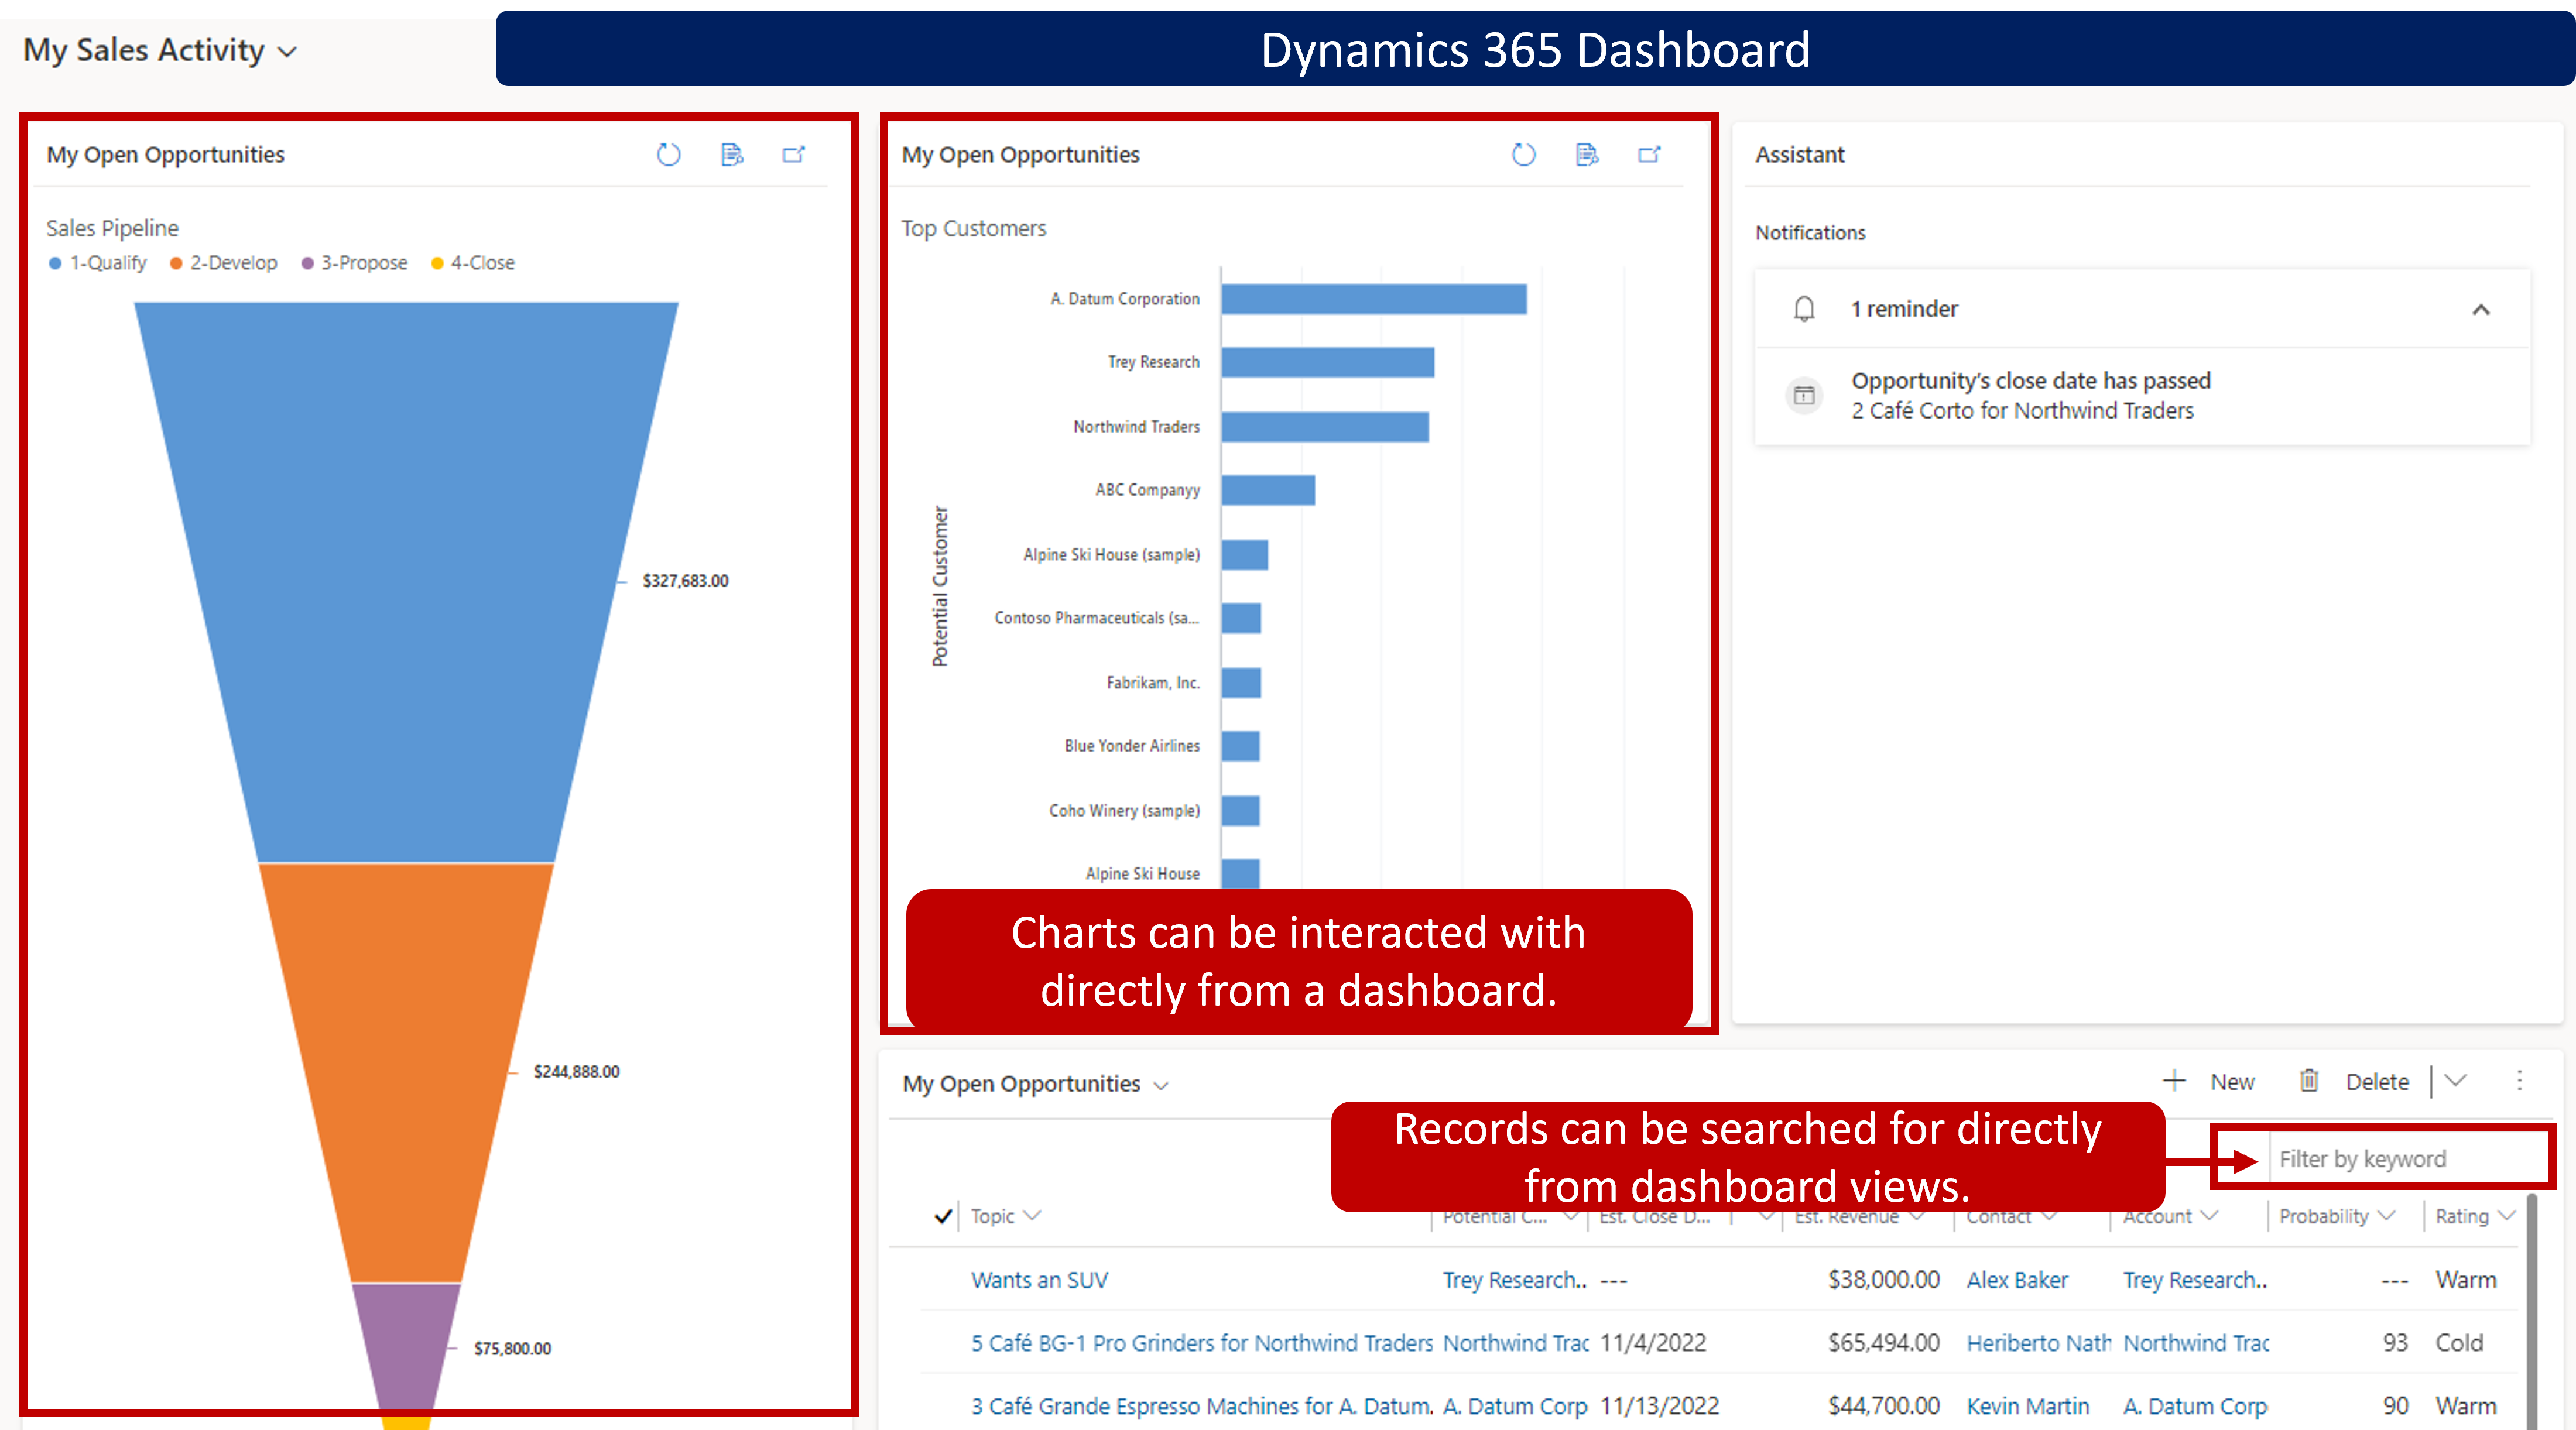 Dynamics 365 Dashboard with My Open Opportunities Sales Pipeline funnel chart highlighted. Also a Top Customers bar chart is highlighted. You can interact with charts directly from a dashboard. The search box is highlighted. You can search for records directly from dashboard views.